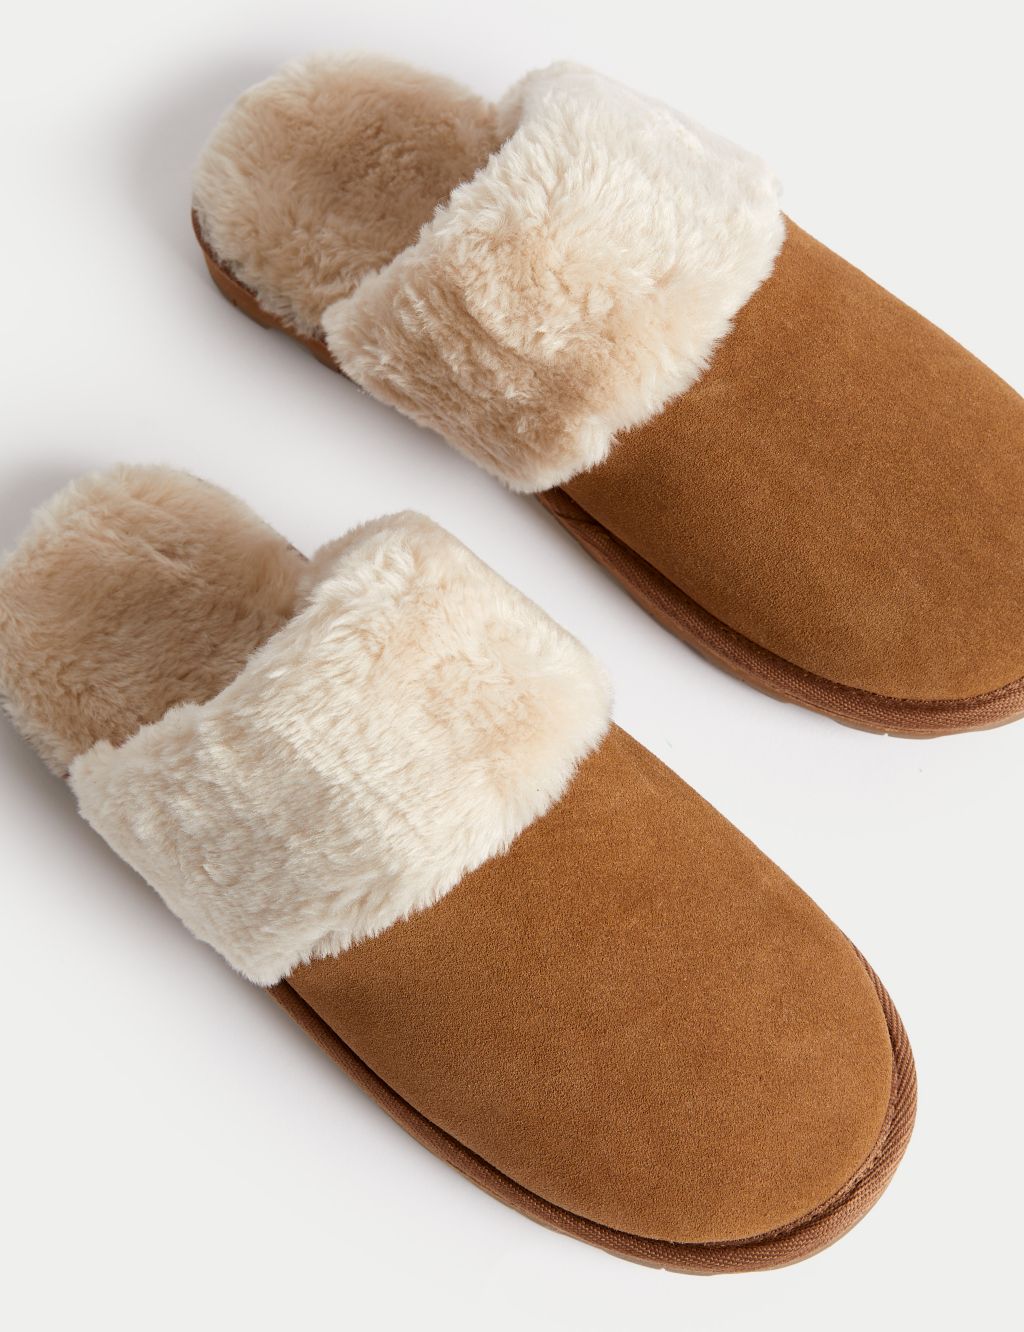 Kids' Suede Freshfeet™ Slippers (13 Small - 7 Large) image 3